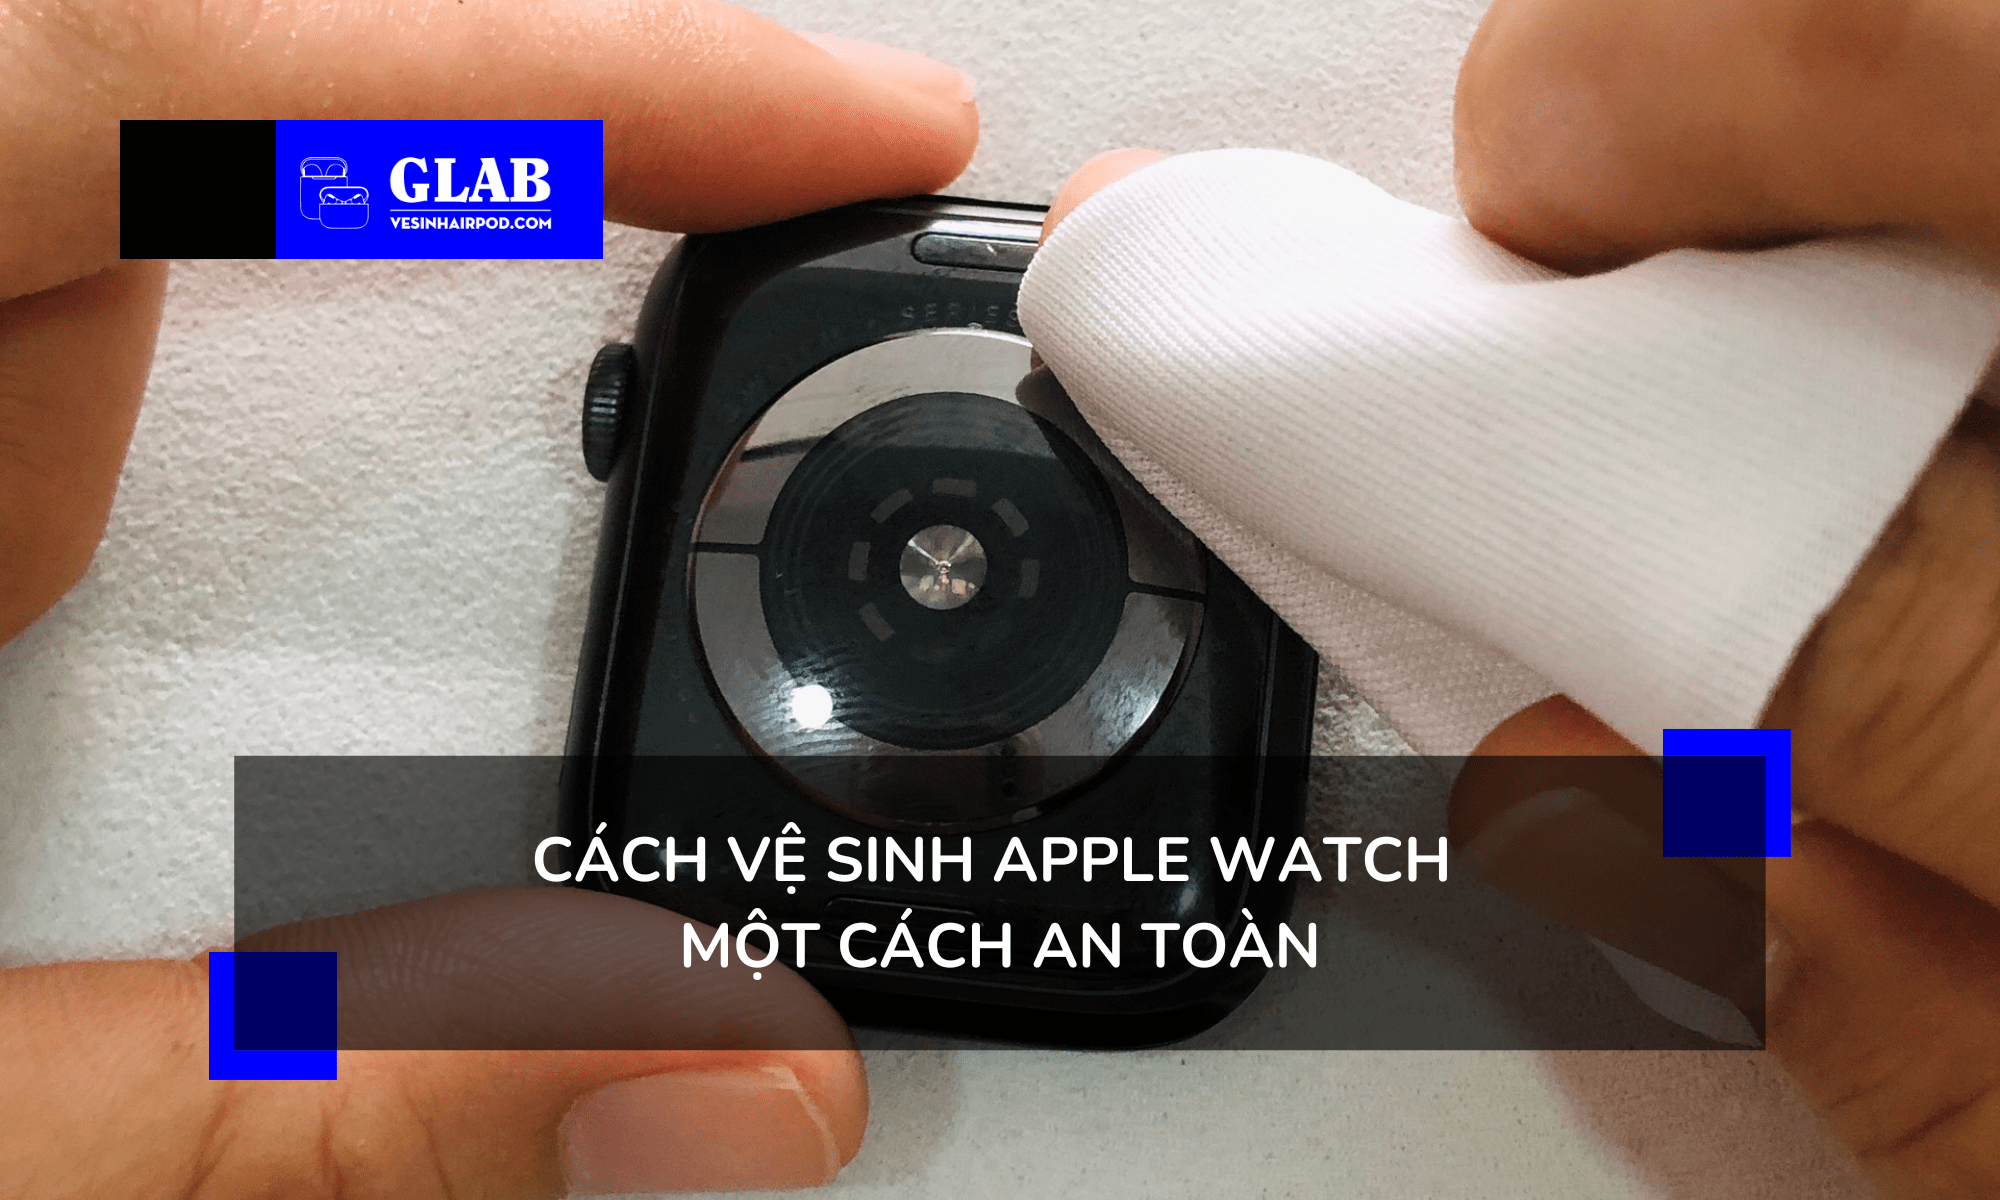 ve-sinh-dong-ho-apple-watch